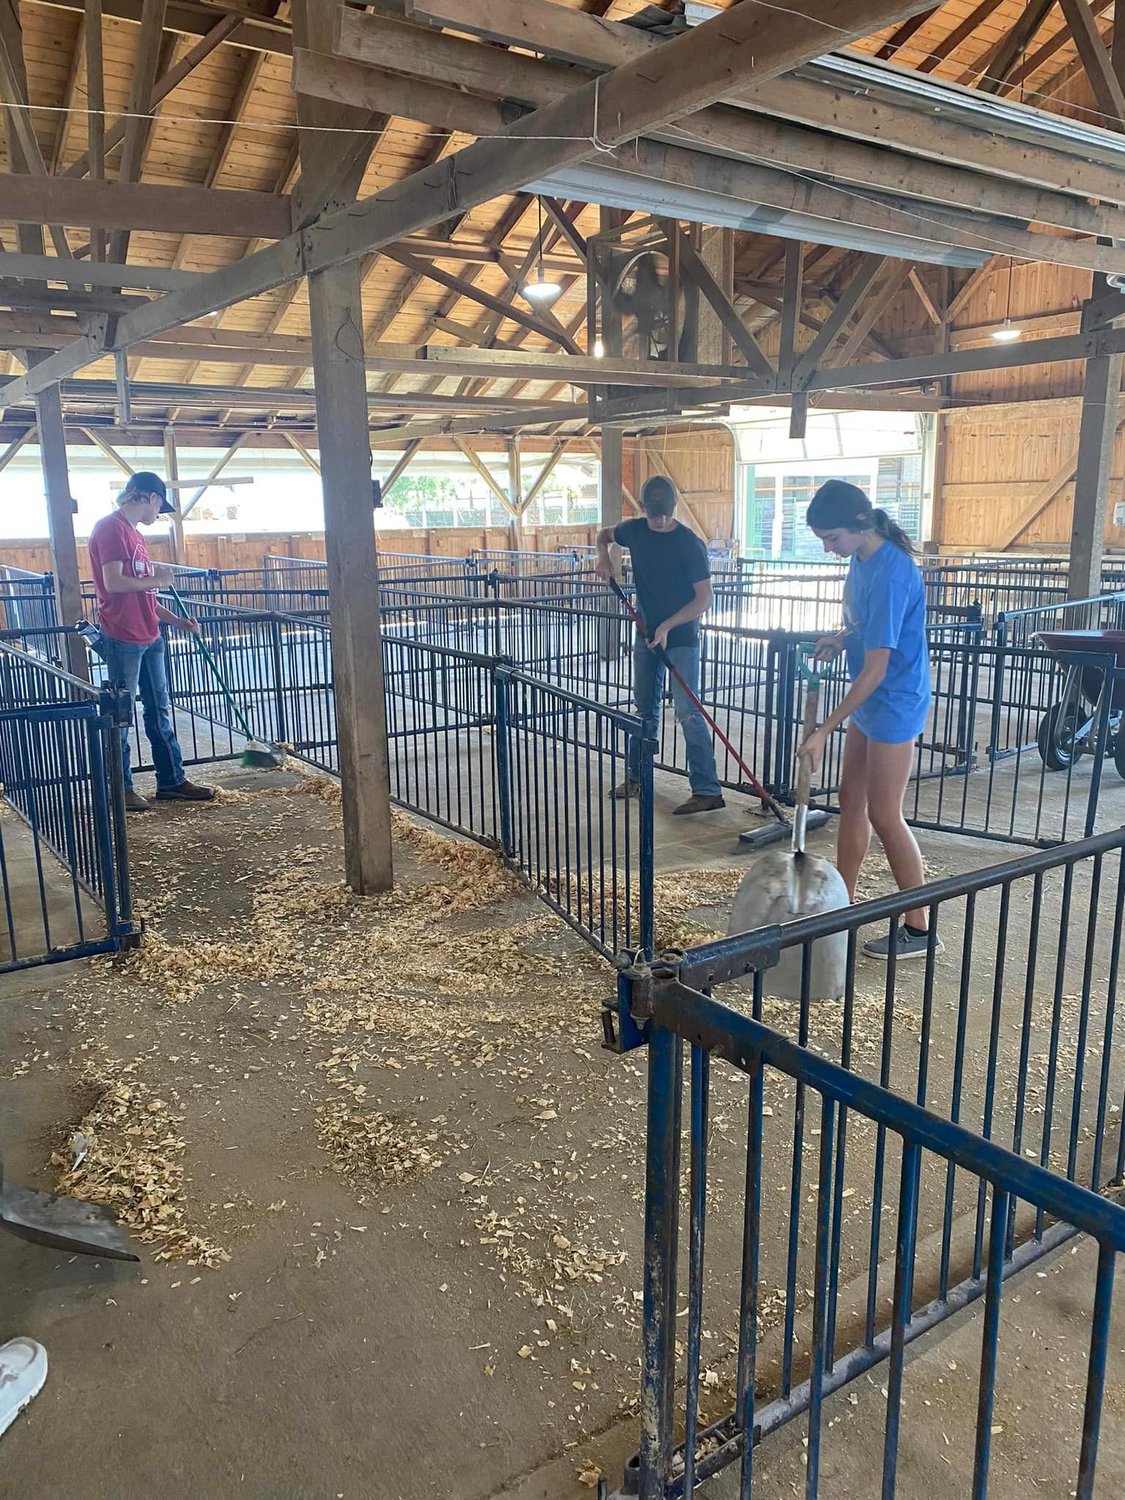 Highlander 4-H members Jacob Hartzler, Erika Thomann, and Brock Thomann helped the club raise money by cleaning goat pens after the Iowa Meat Goat Association show at the fairgrounds.